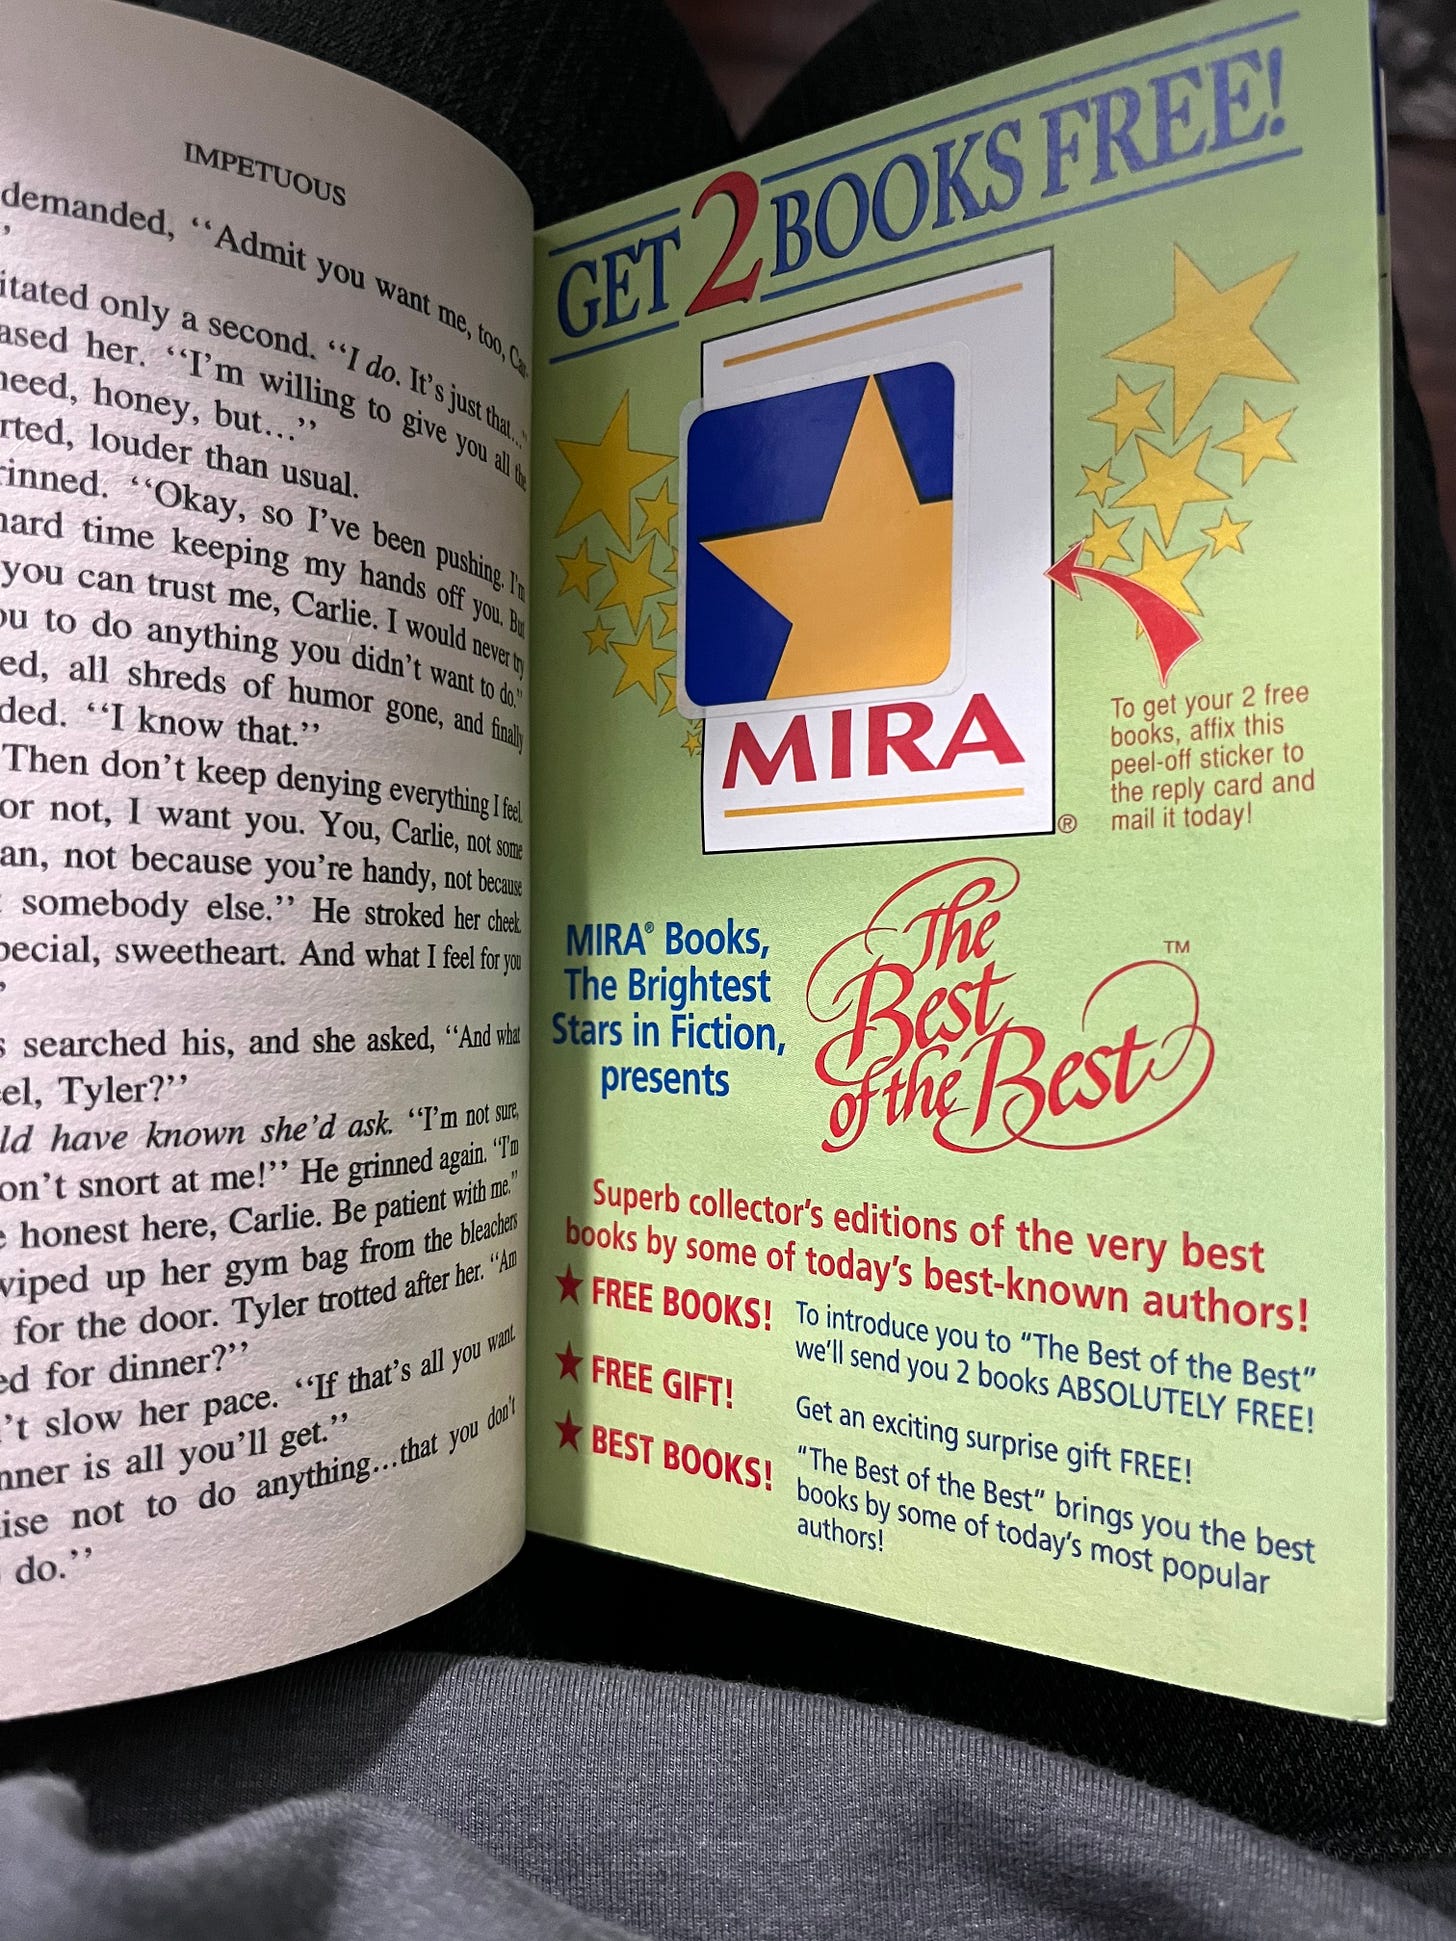 Image of inside of Impetuous book, that shows one of those yardstick perforated pages advertising a deal where you send away a reply card with a sticker on it to get 2 free books.